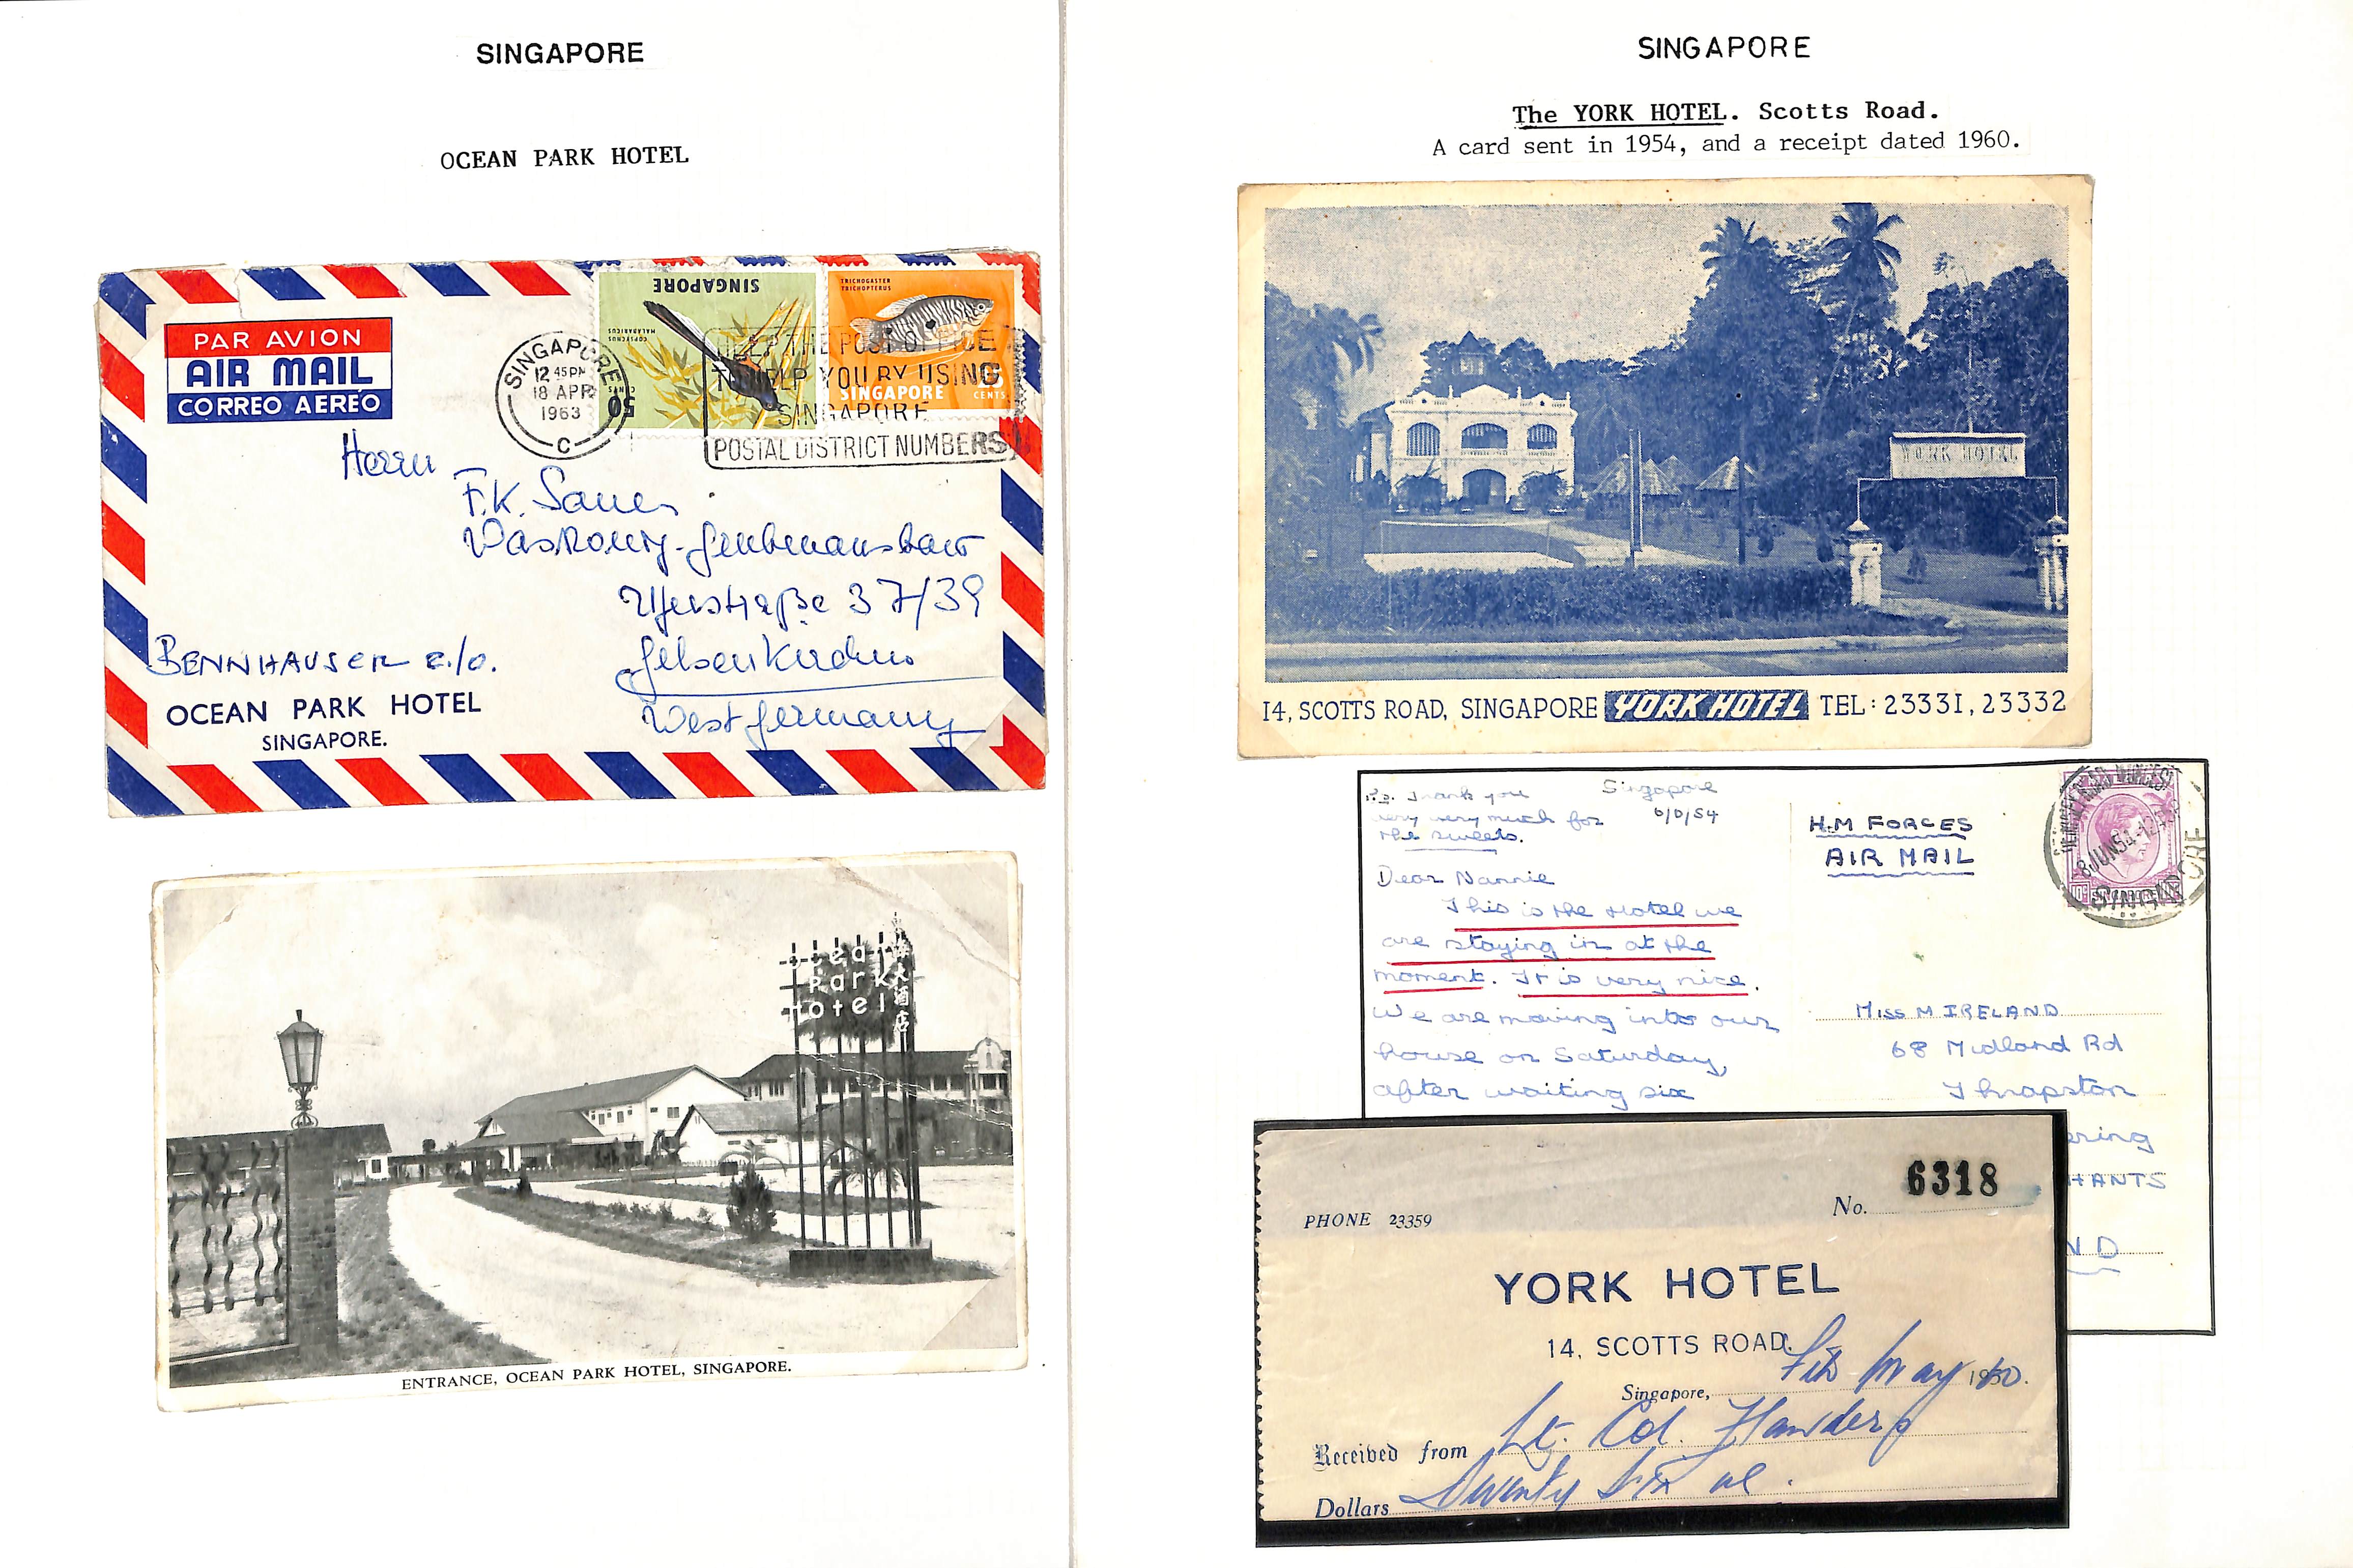 Hotels. 1900-85 Printed envelopes, picture postcards and ephemera from various Singapore hotels - Image 4 of 10